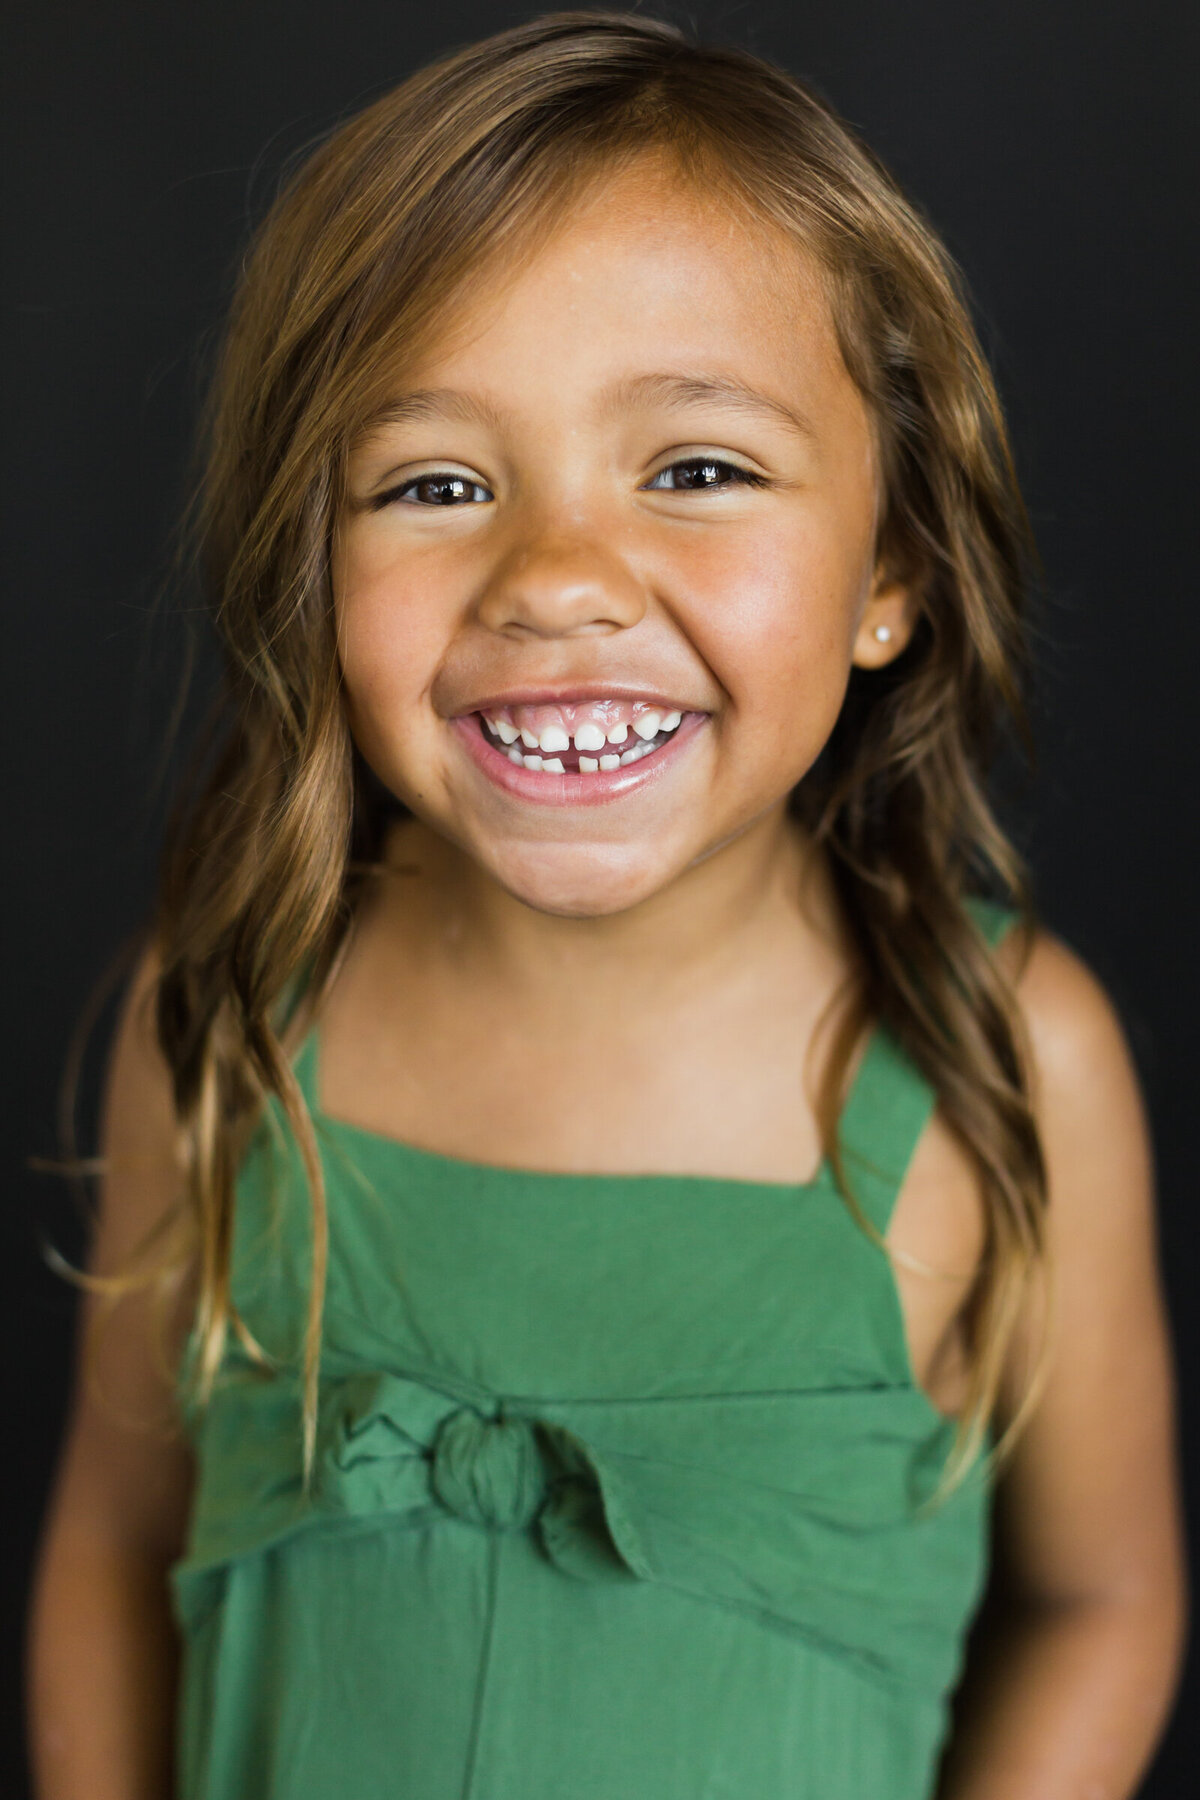 child portrait photography and head shot for young girl